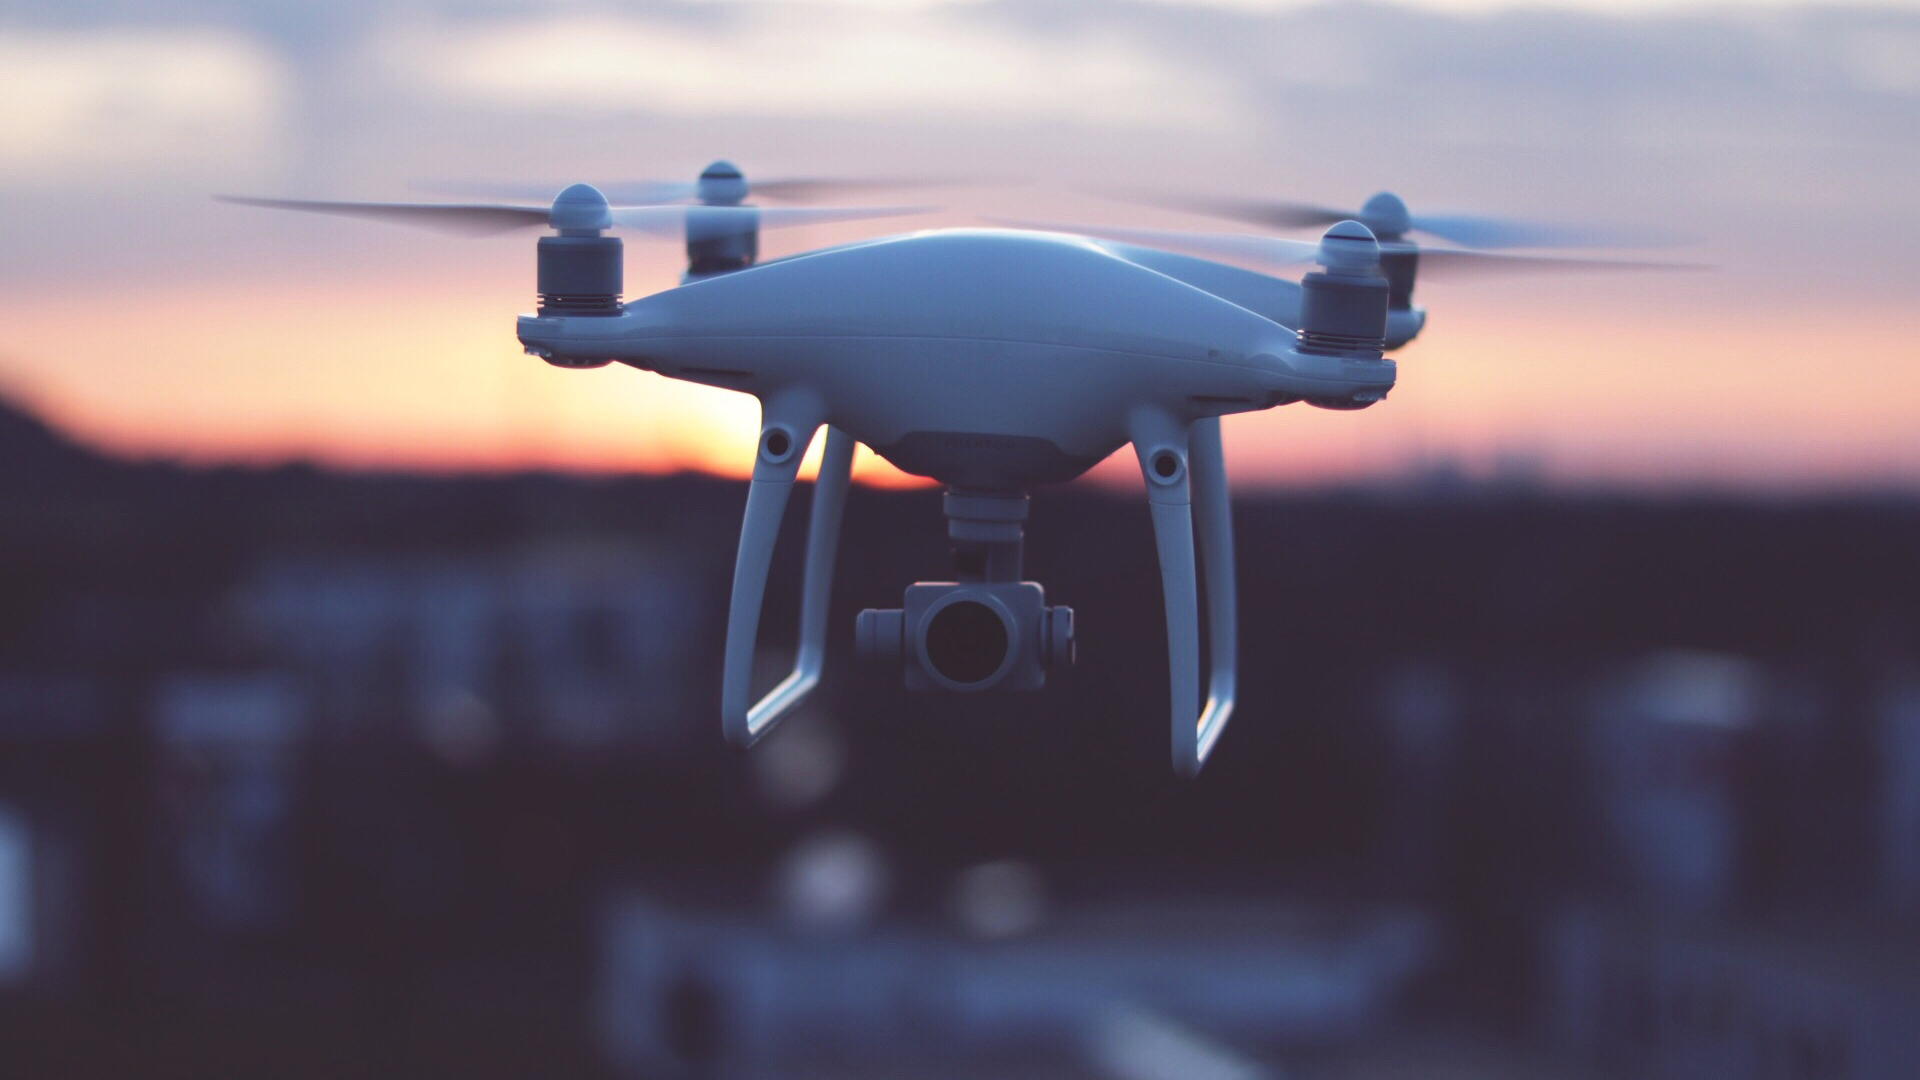 What is an FPV drone?The image shows a drone flying in the evening